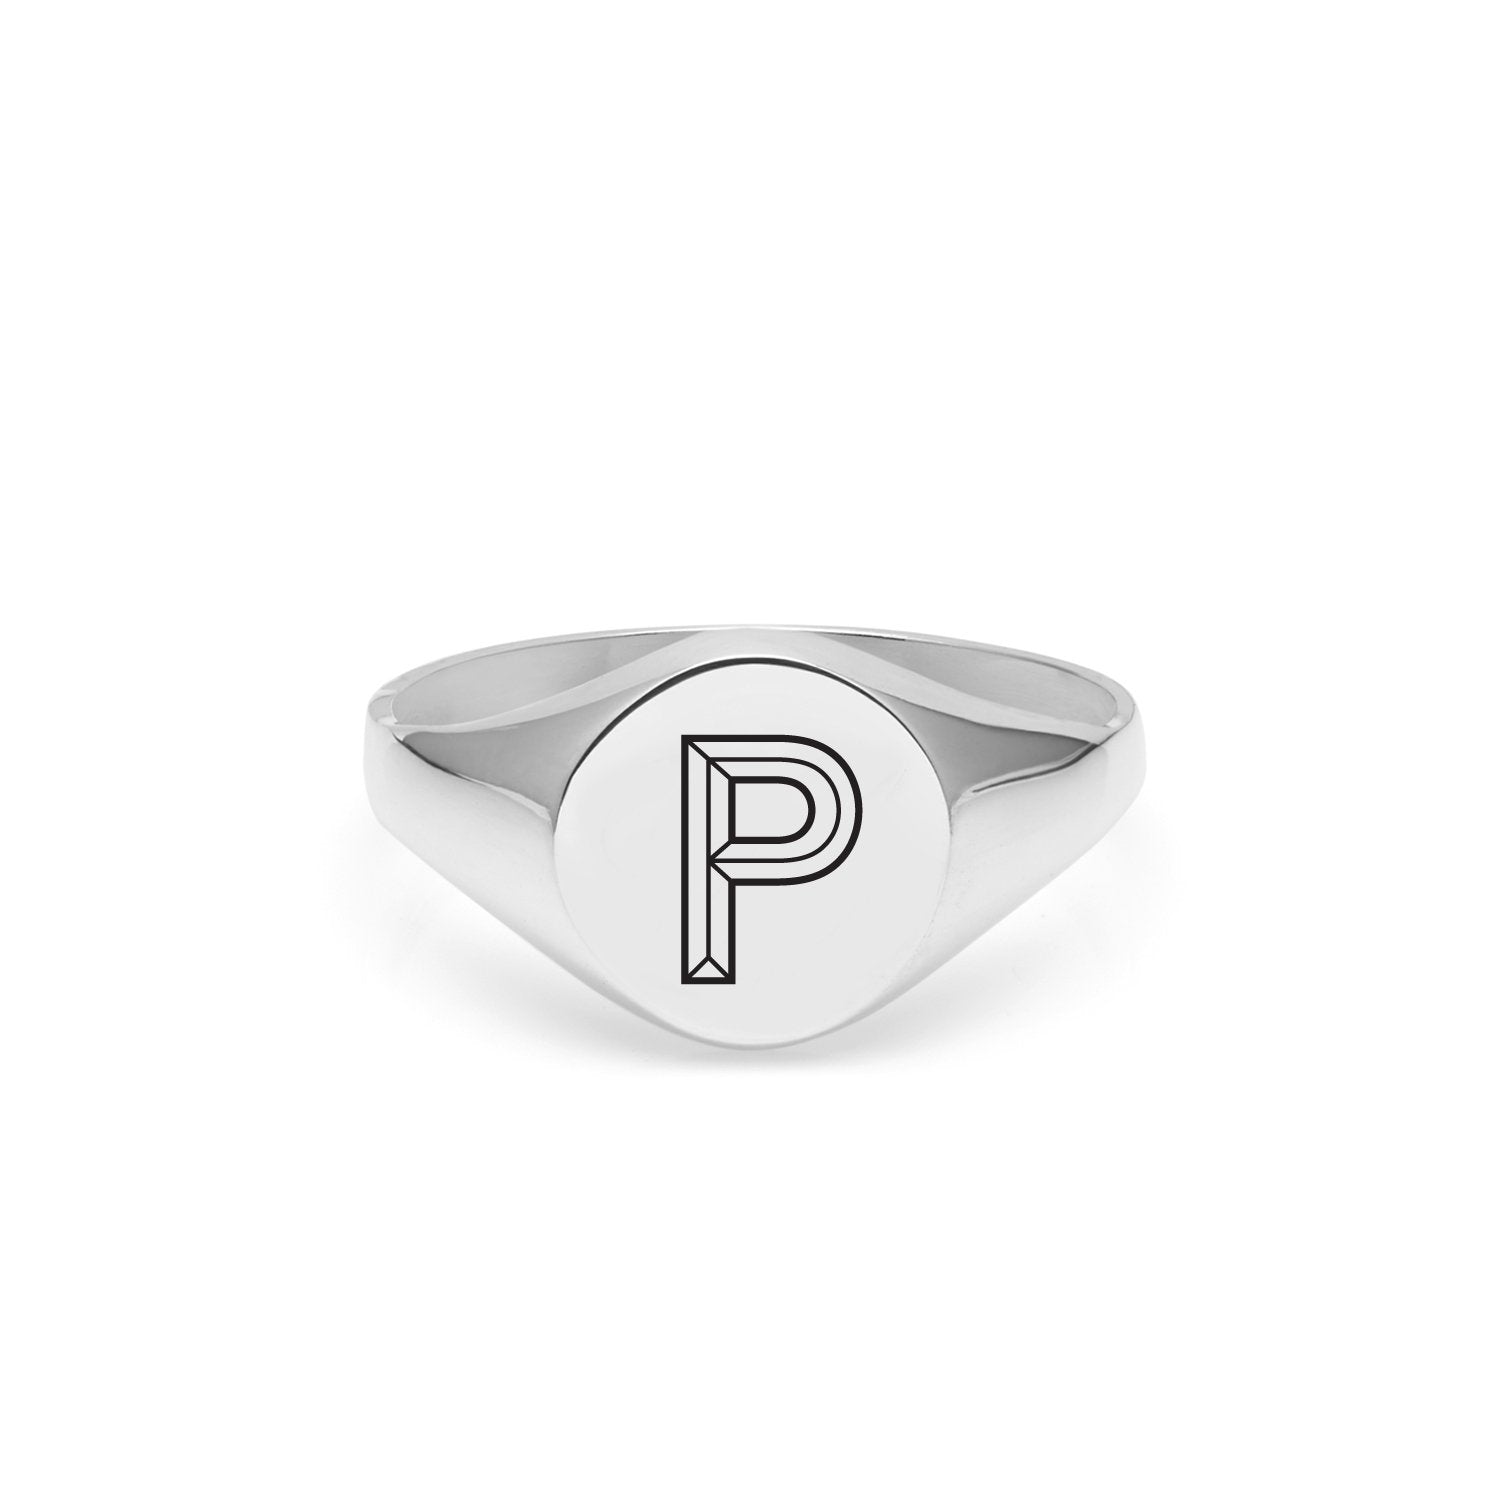 Facett Initial P Round Signet Ring - Silver - Myia Bonner Jewellery